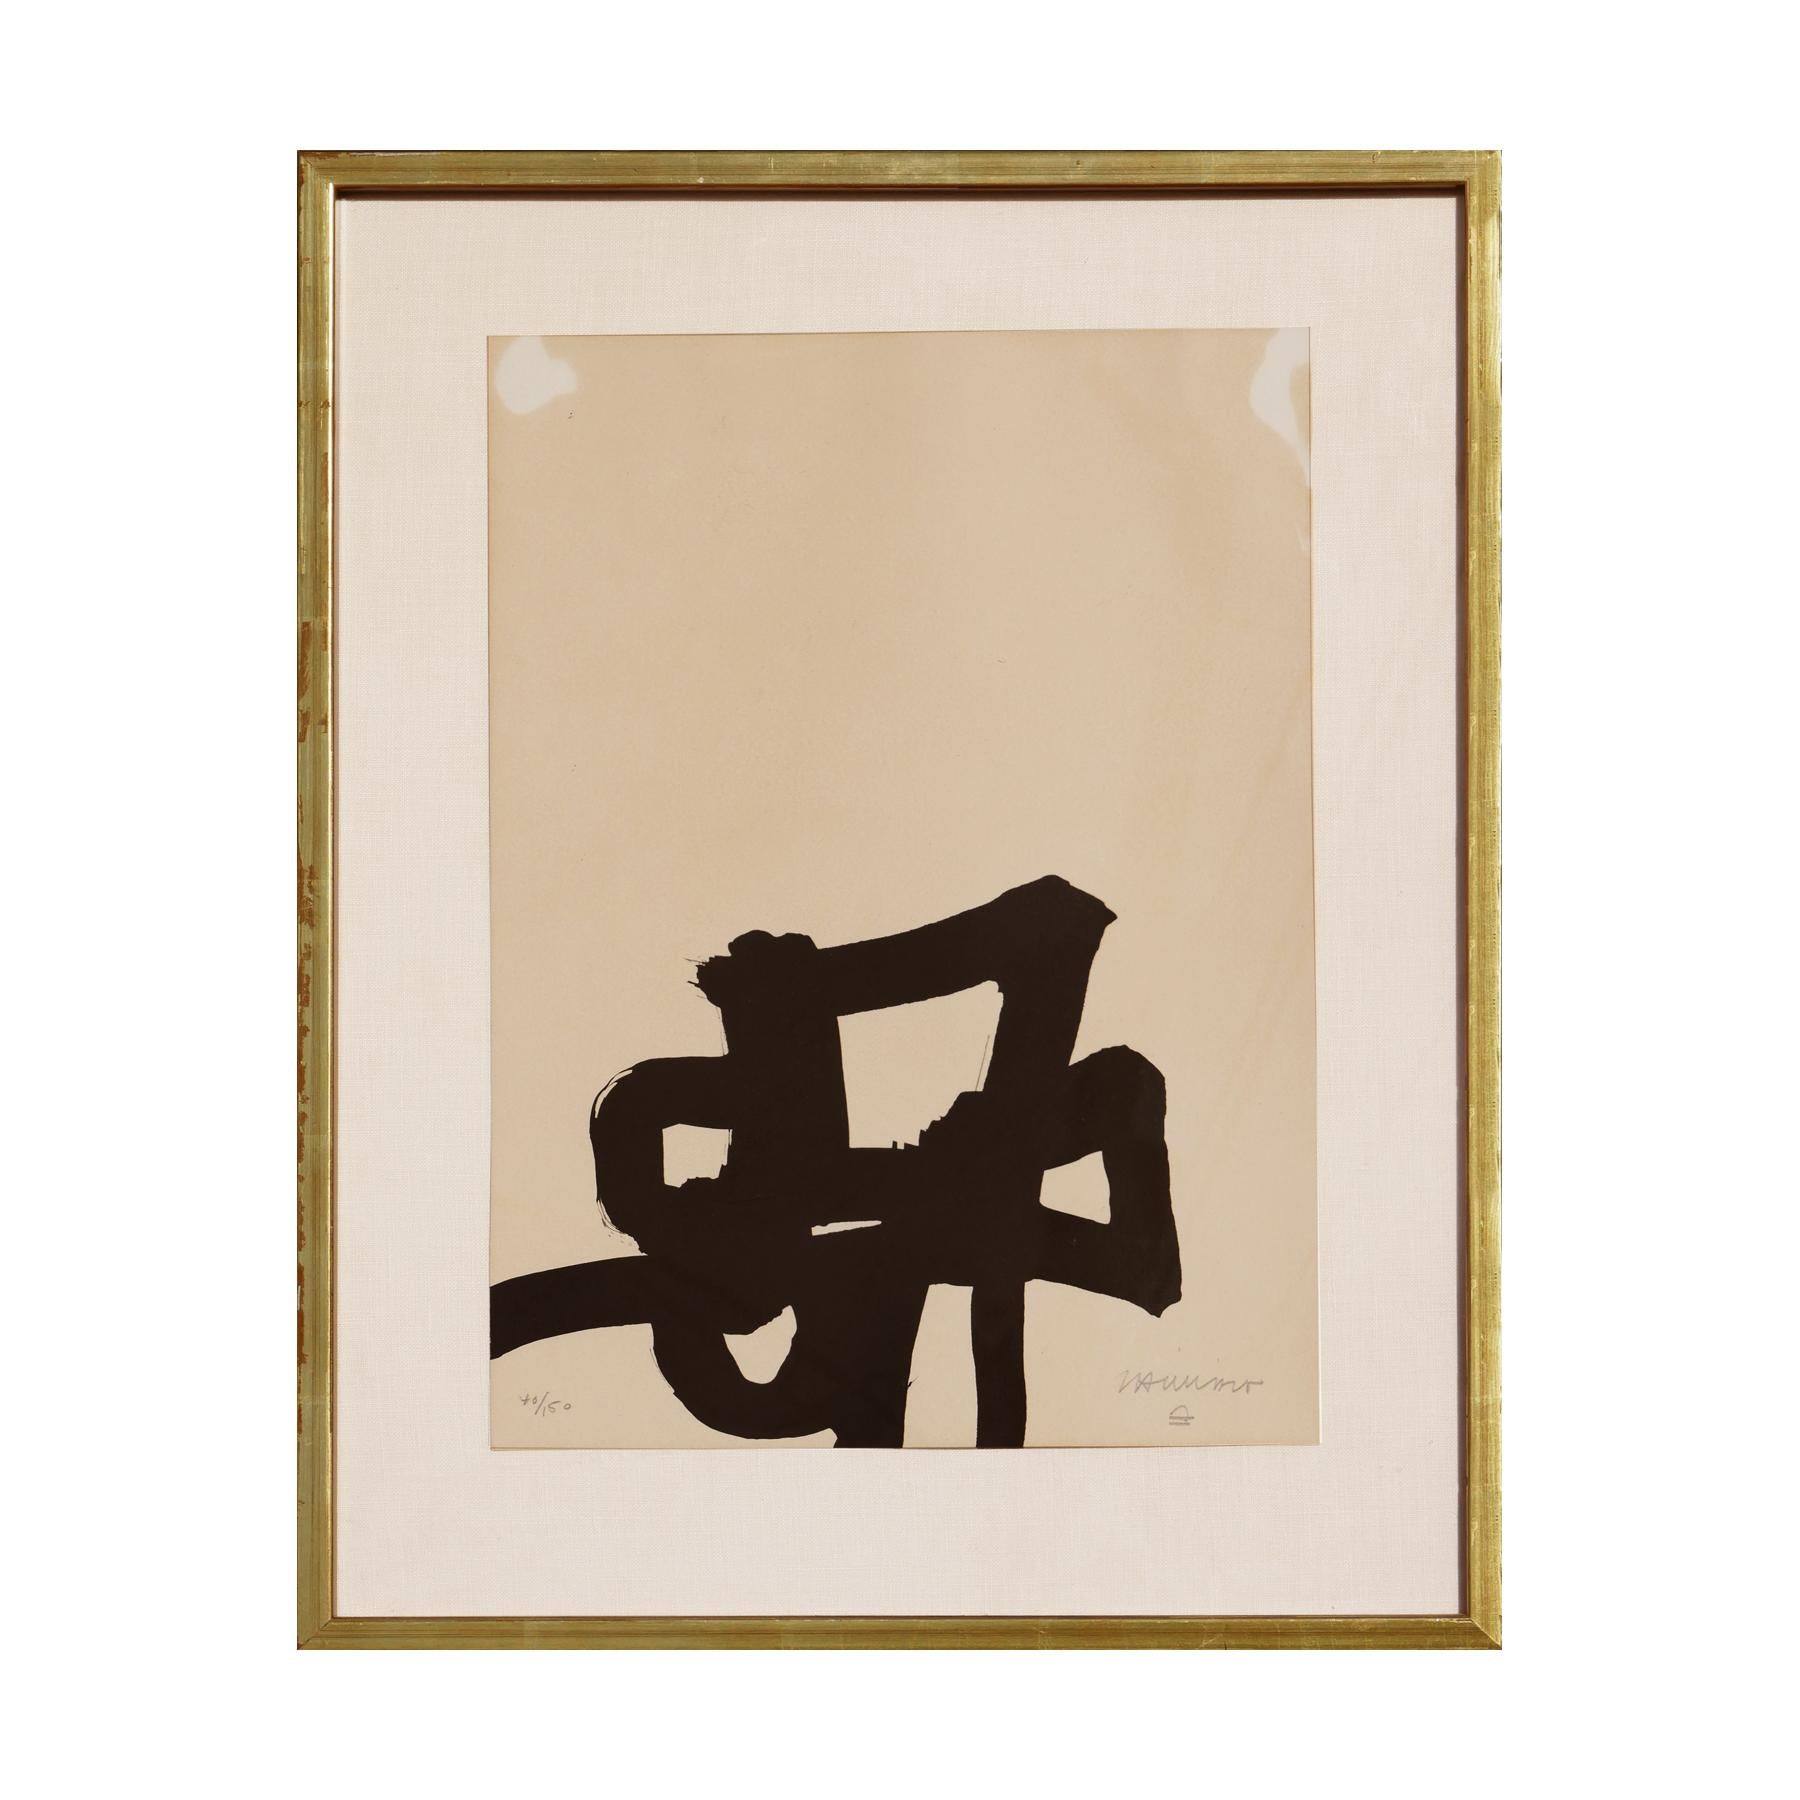 “Dentro y Fuera” Black and White Abstract Modern Lithograph - Print by Eduardo Chillida